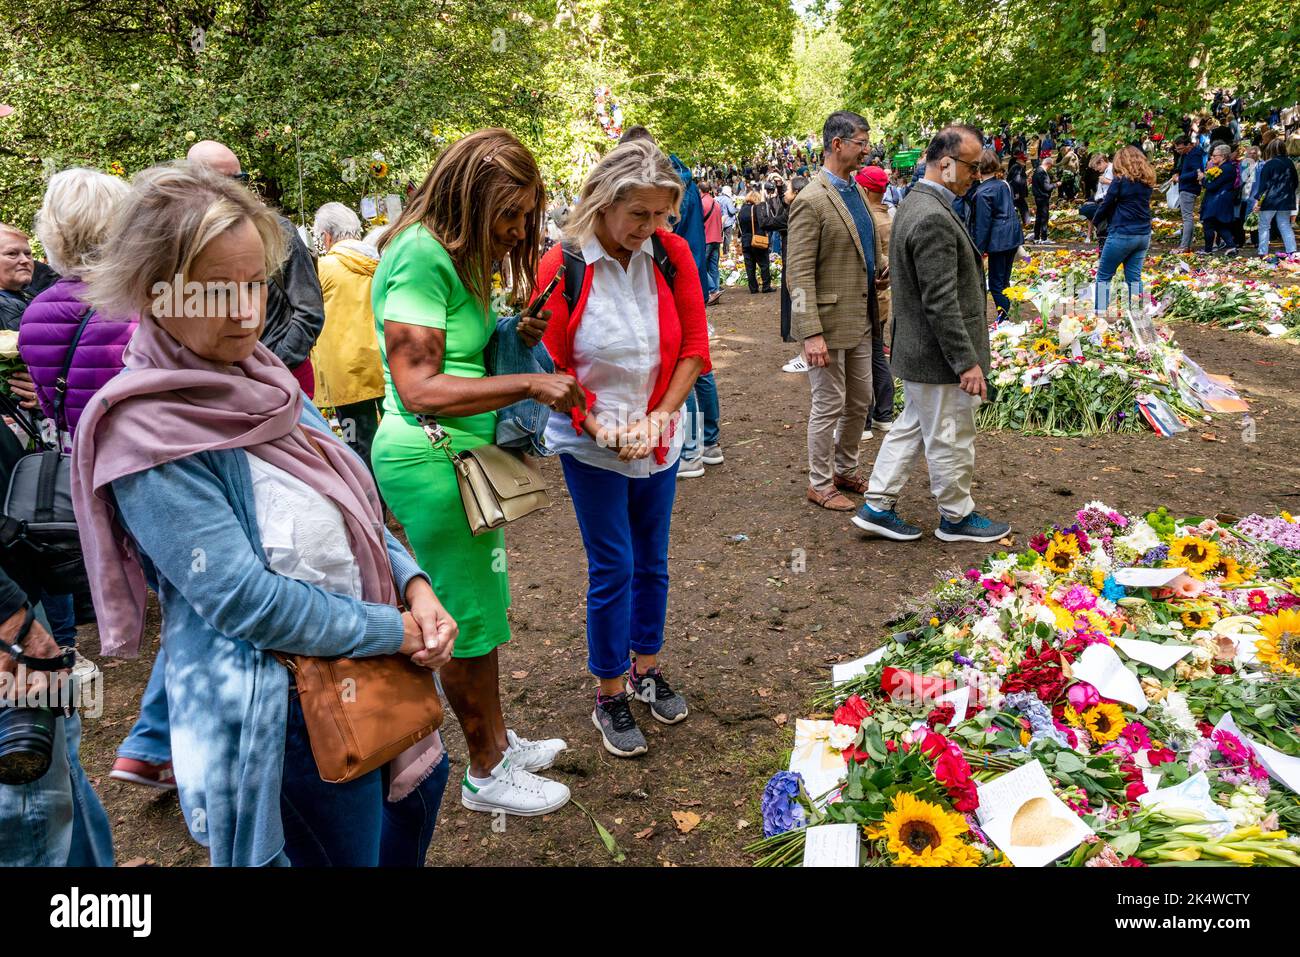 British People Looking At The Floral Tributes For Queen Elizabeth II In The Floral Tribute Garden In Green Park, London, UK Stock Photo